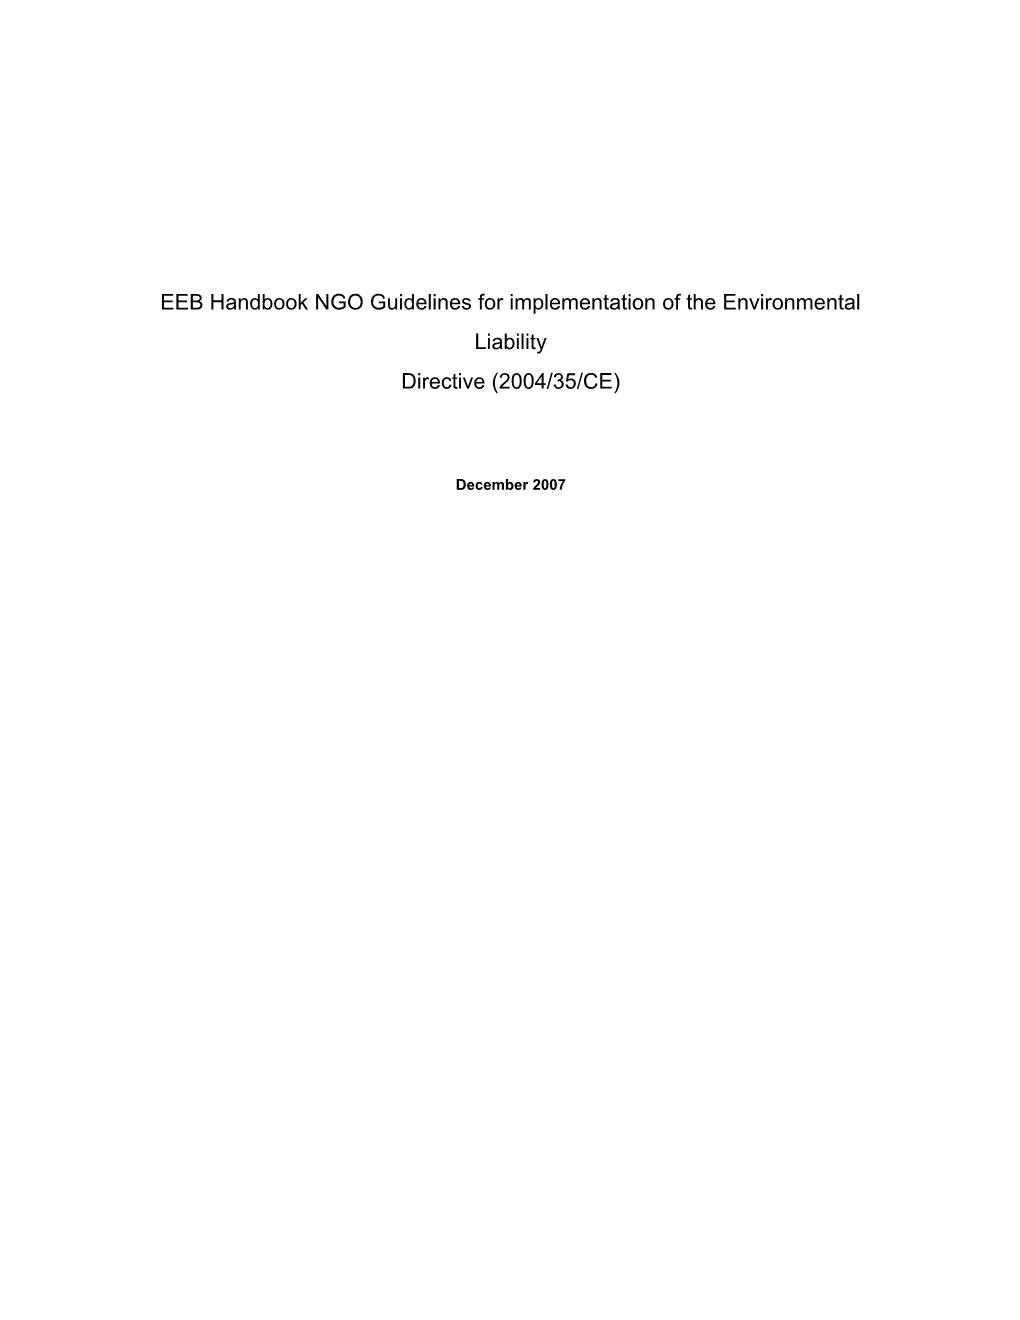 EEB Handbook NGO Guidelines for Implementation of the Environmental Liability